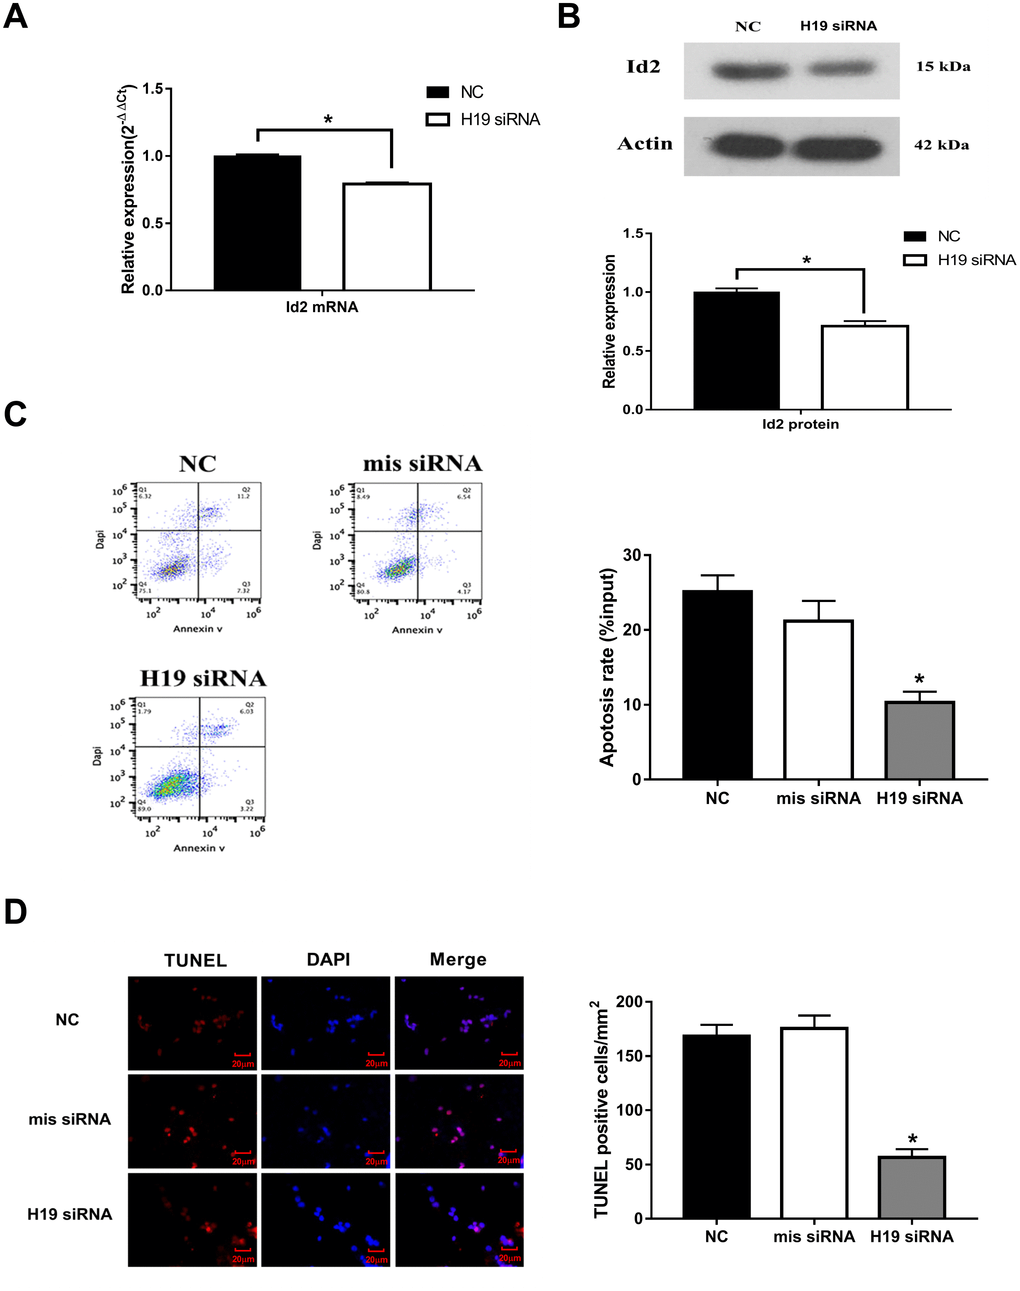 Knockdown of H19 decreased Id2 expression, and attenuated neuronal apoptosis in vitro. (A) After knockdown of H19 with siRNA, Id2 mRNA (A) and protein (B) levels were significantly decreased in OGD neuronal cells. (C) Flow cytometric analysis showed a significant decrease in the rate of neuronal apoptosis in OGD neuronal cells of H19 siRNA group, compared with the NC group or mis siRNA group. (D) Immunofluorescence staining demonstrated a similar decrease rate of neuronal apoptosis in H19 siRNA group.